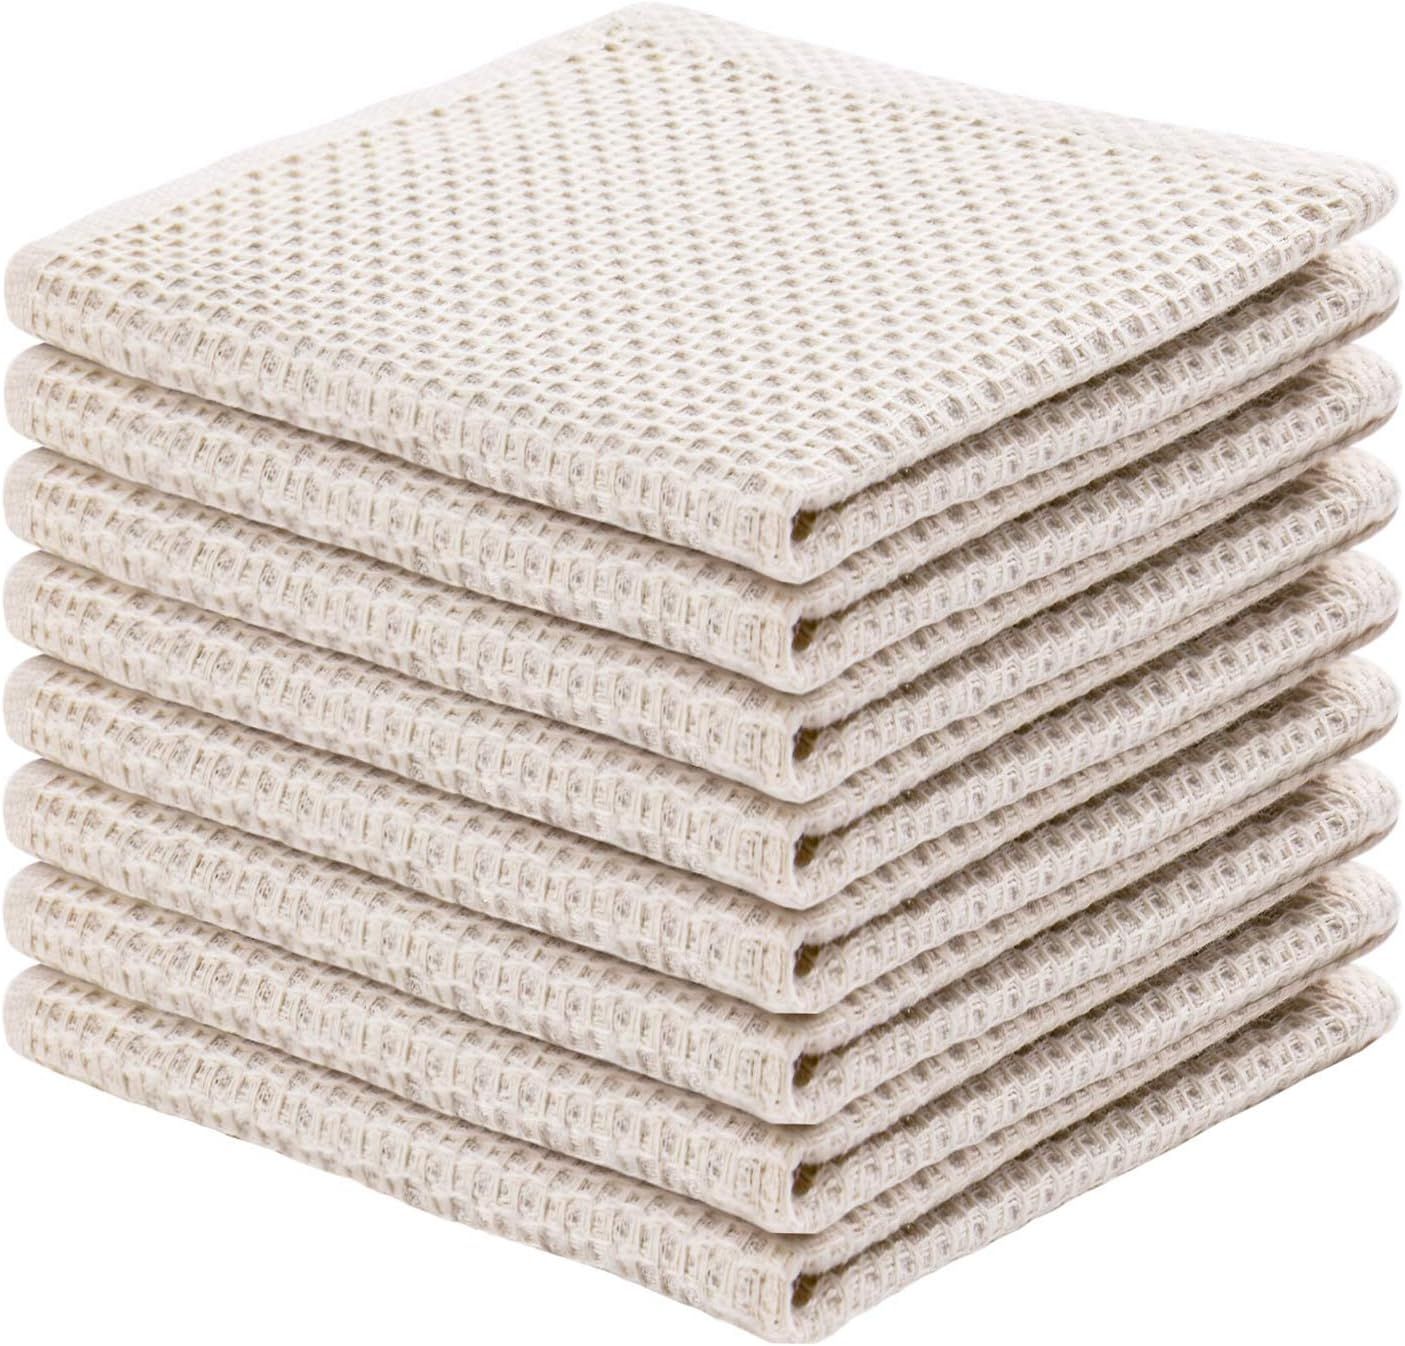 100% Cotton Kitchen Dish Cloths, 8-Pack Waffle Weave Ultra Soft Absorbent Dish Towels Washcloths ... | Amazon (US)